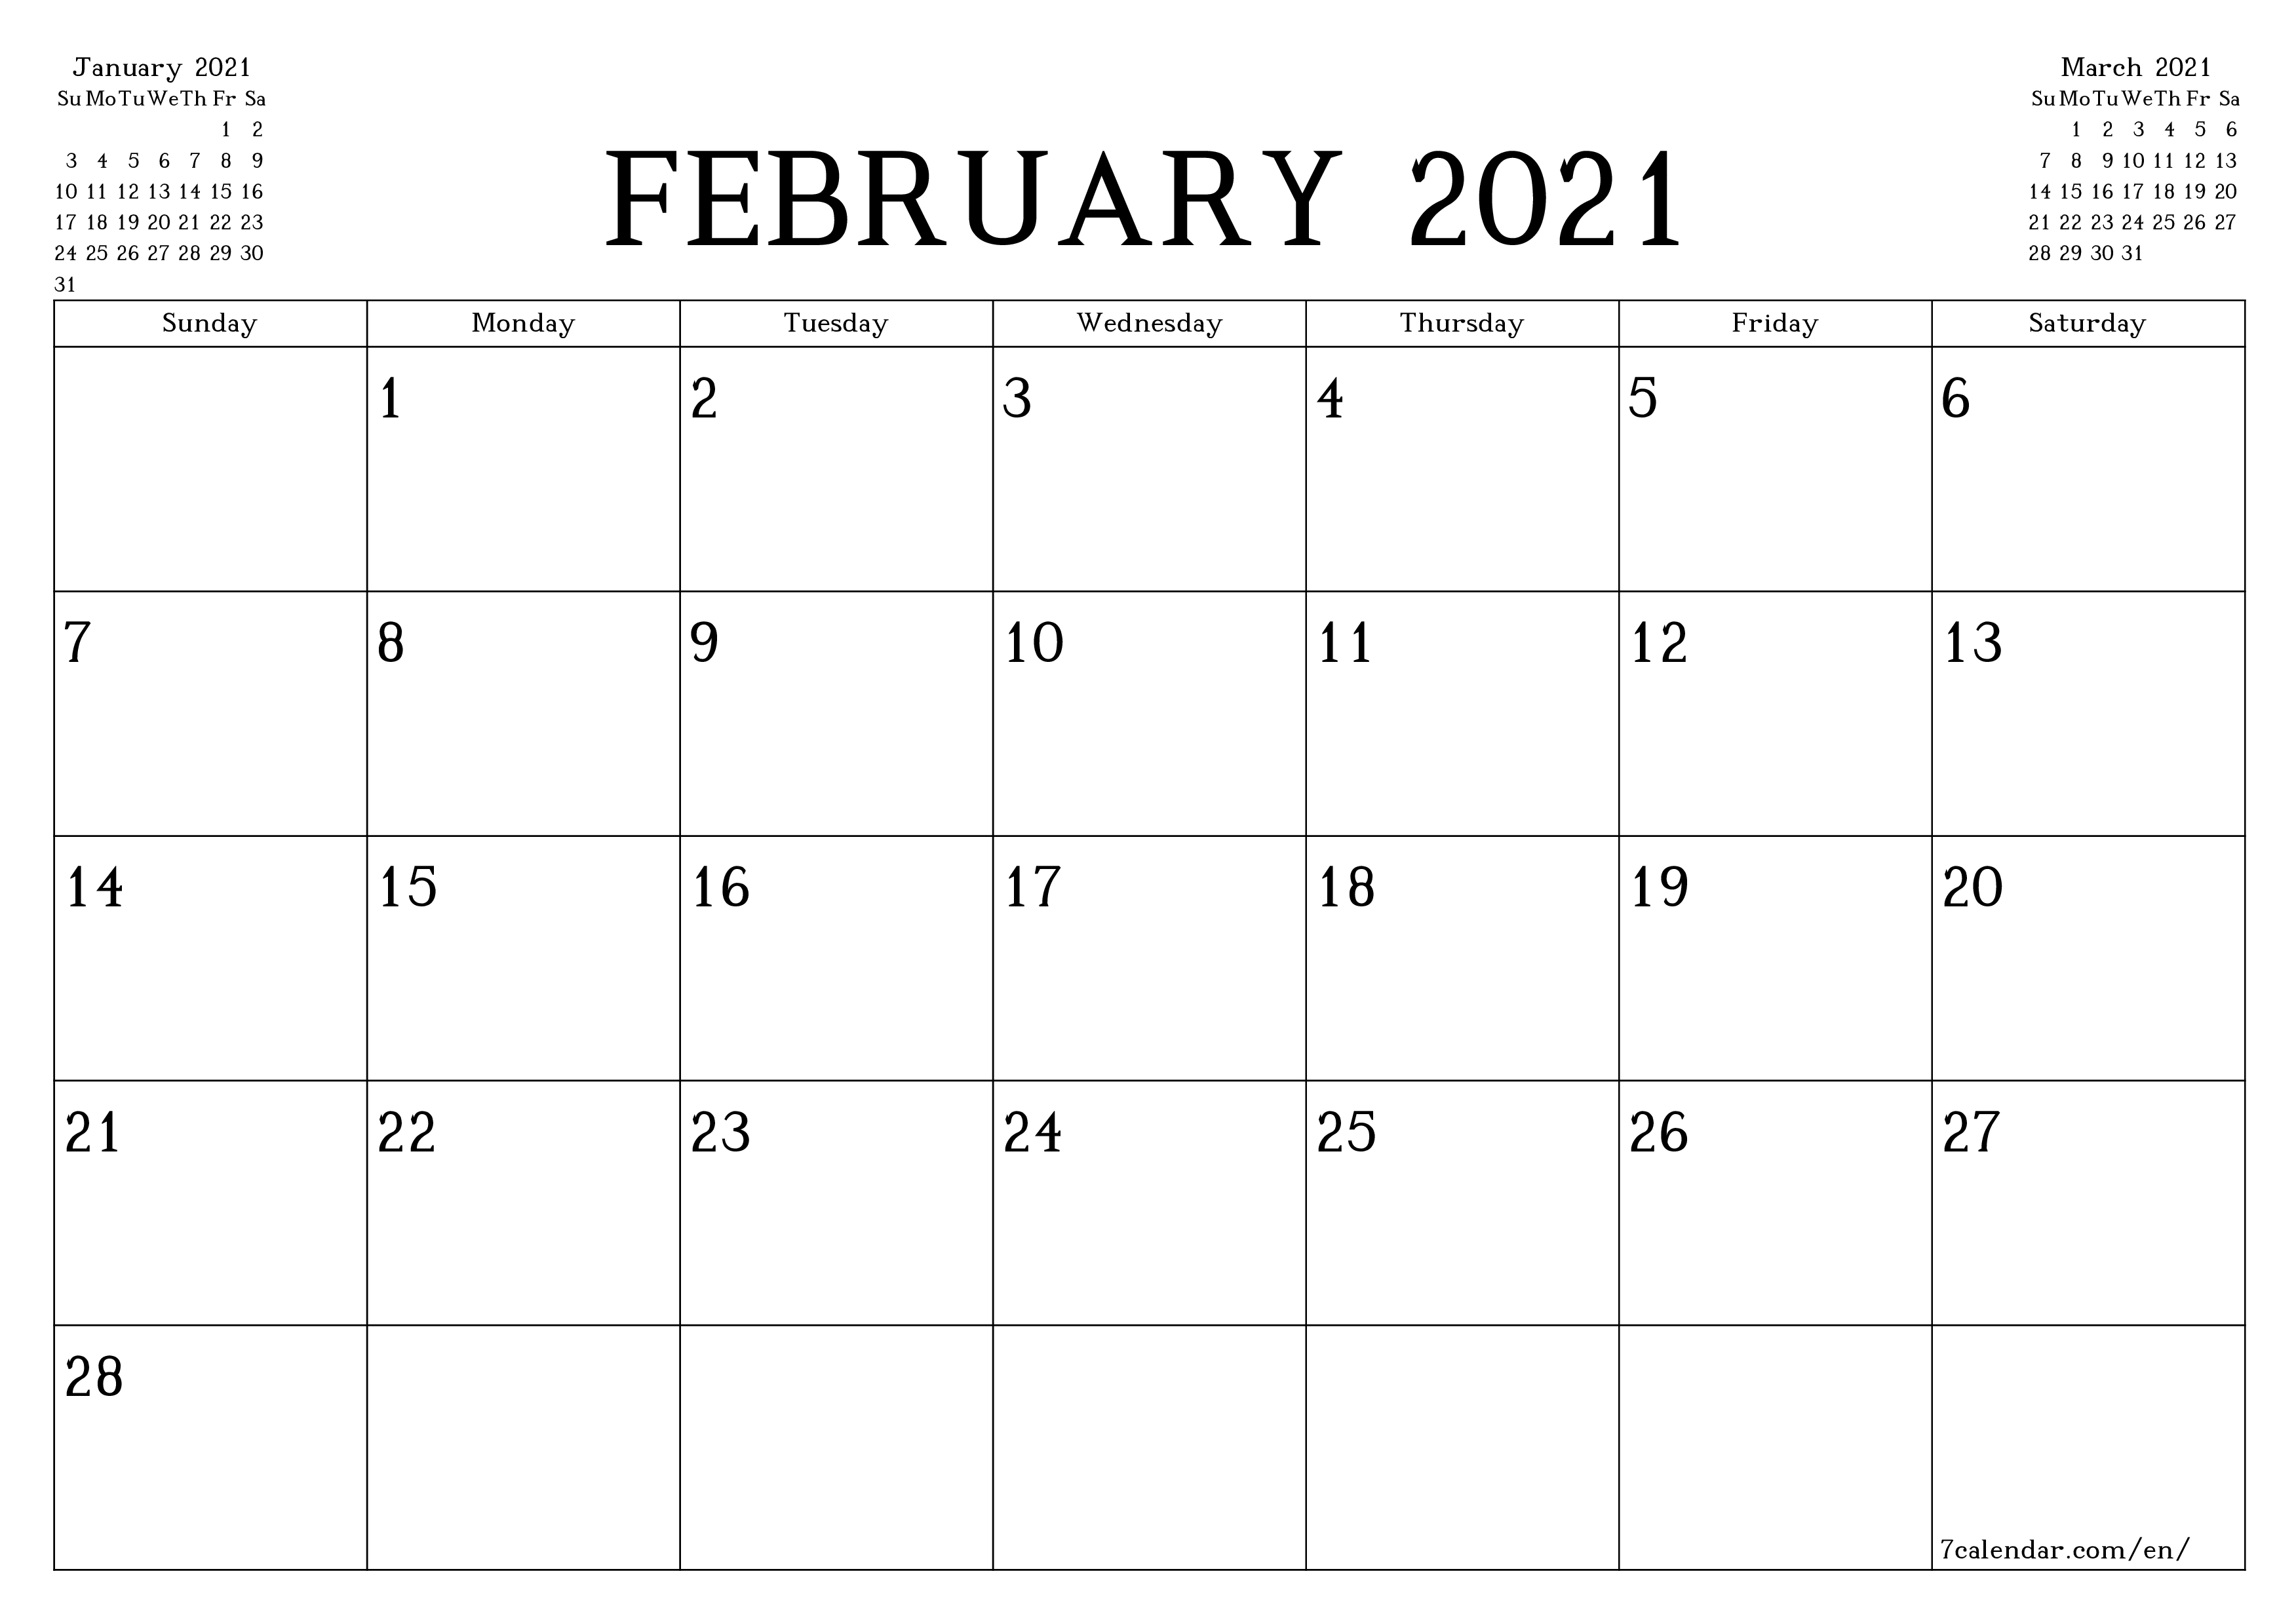 Blank monthly calendar planner for month February 2021 with notes save and print to PDF PNG English - 7calendar.com